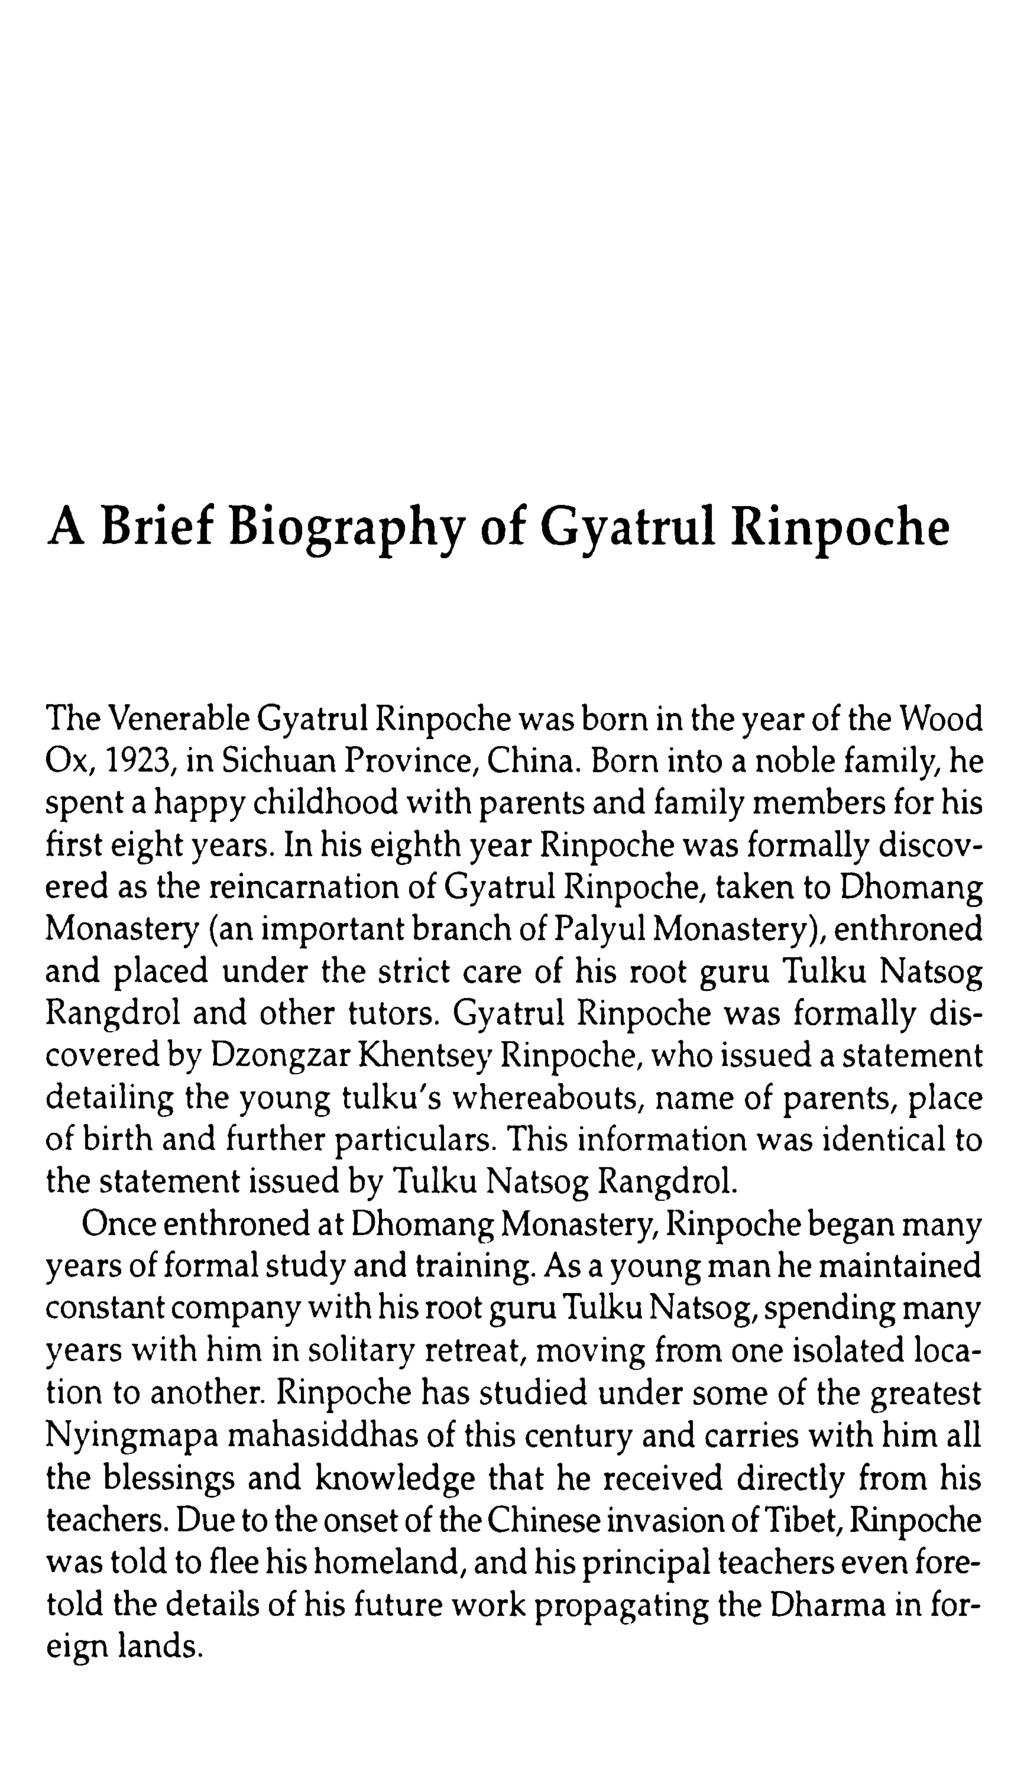 A Brief Biography of Gyatrul Rinpoche The Venerable Gyatrul Rinpoche was born in the year of the Wood Ox, 1923, in Sichuan Province, China.